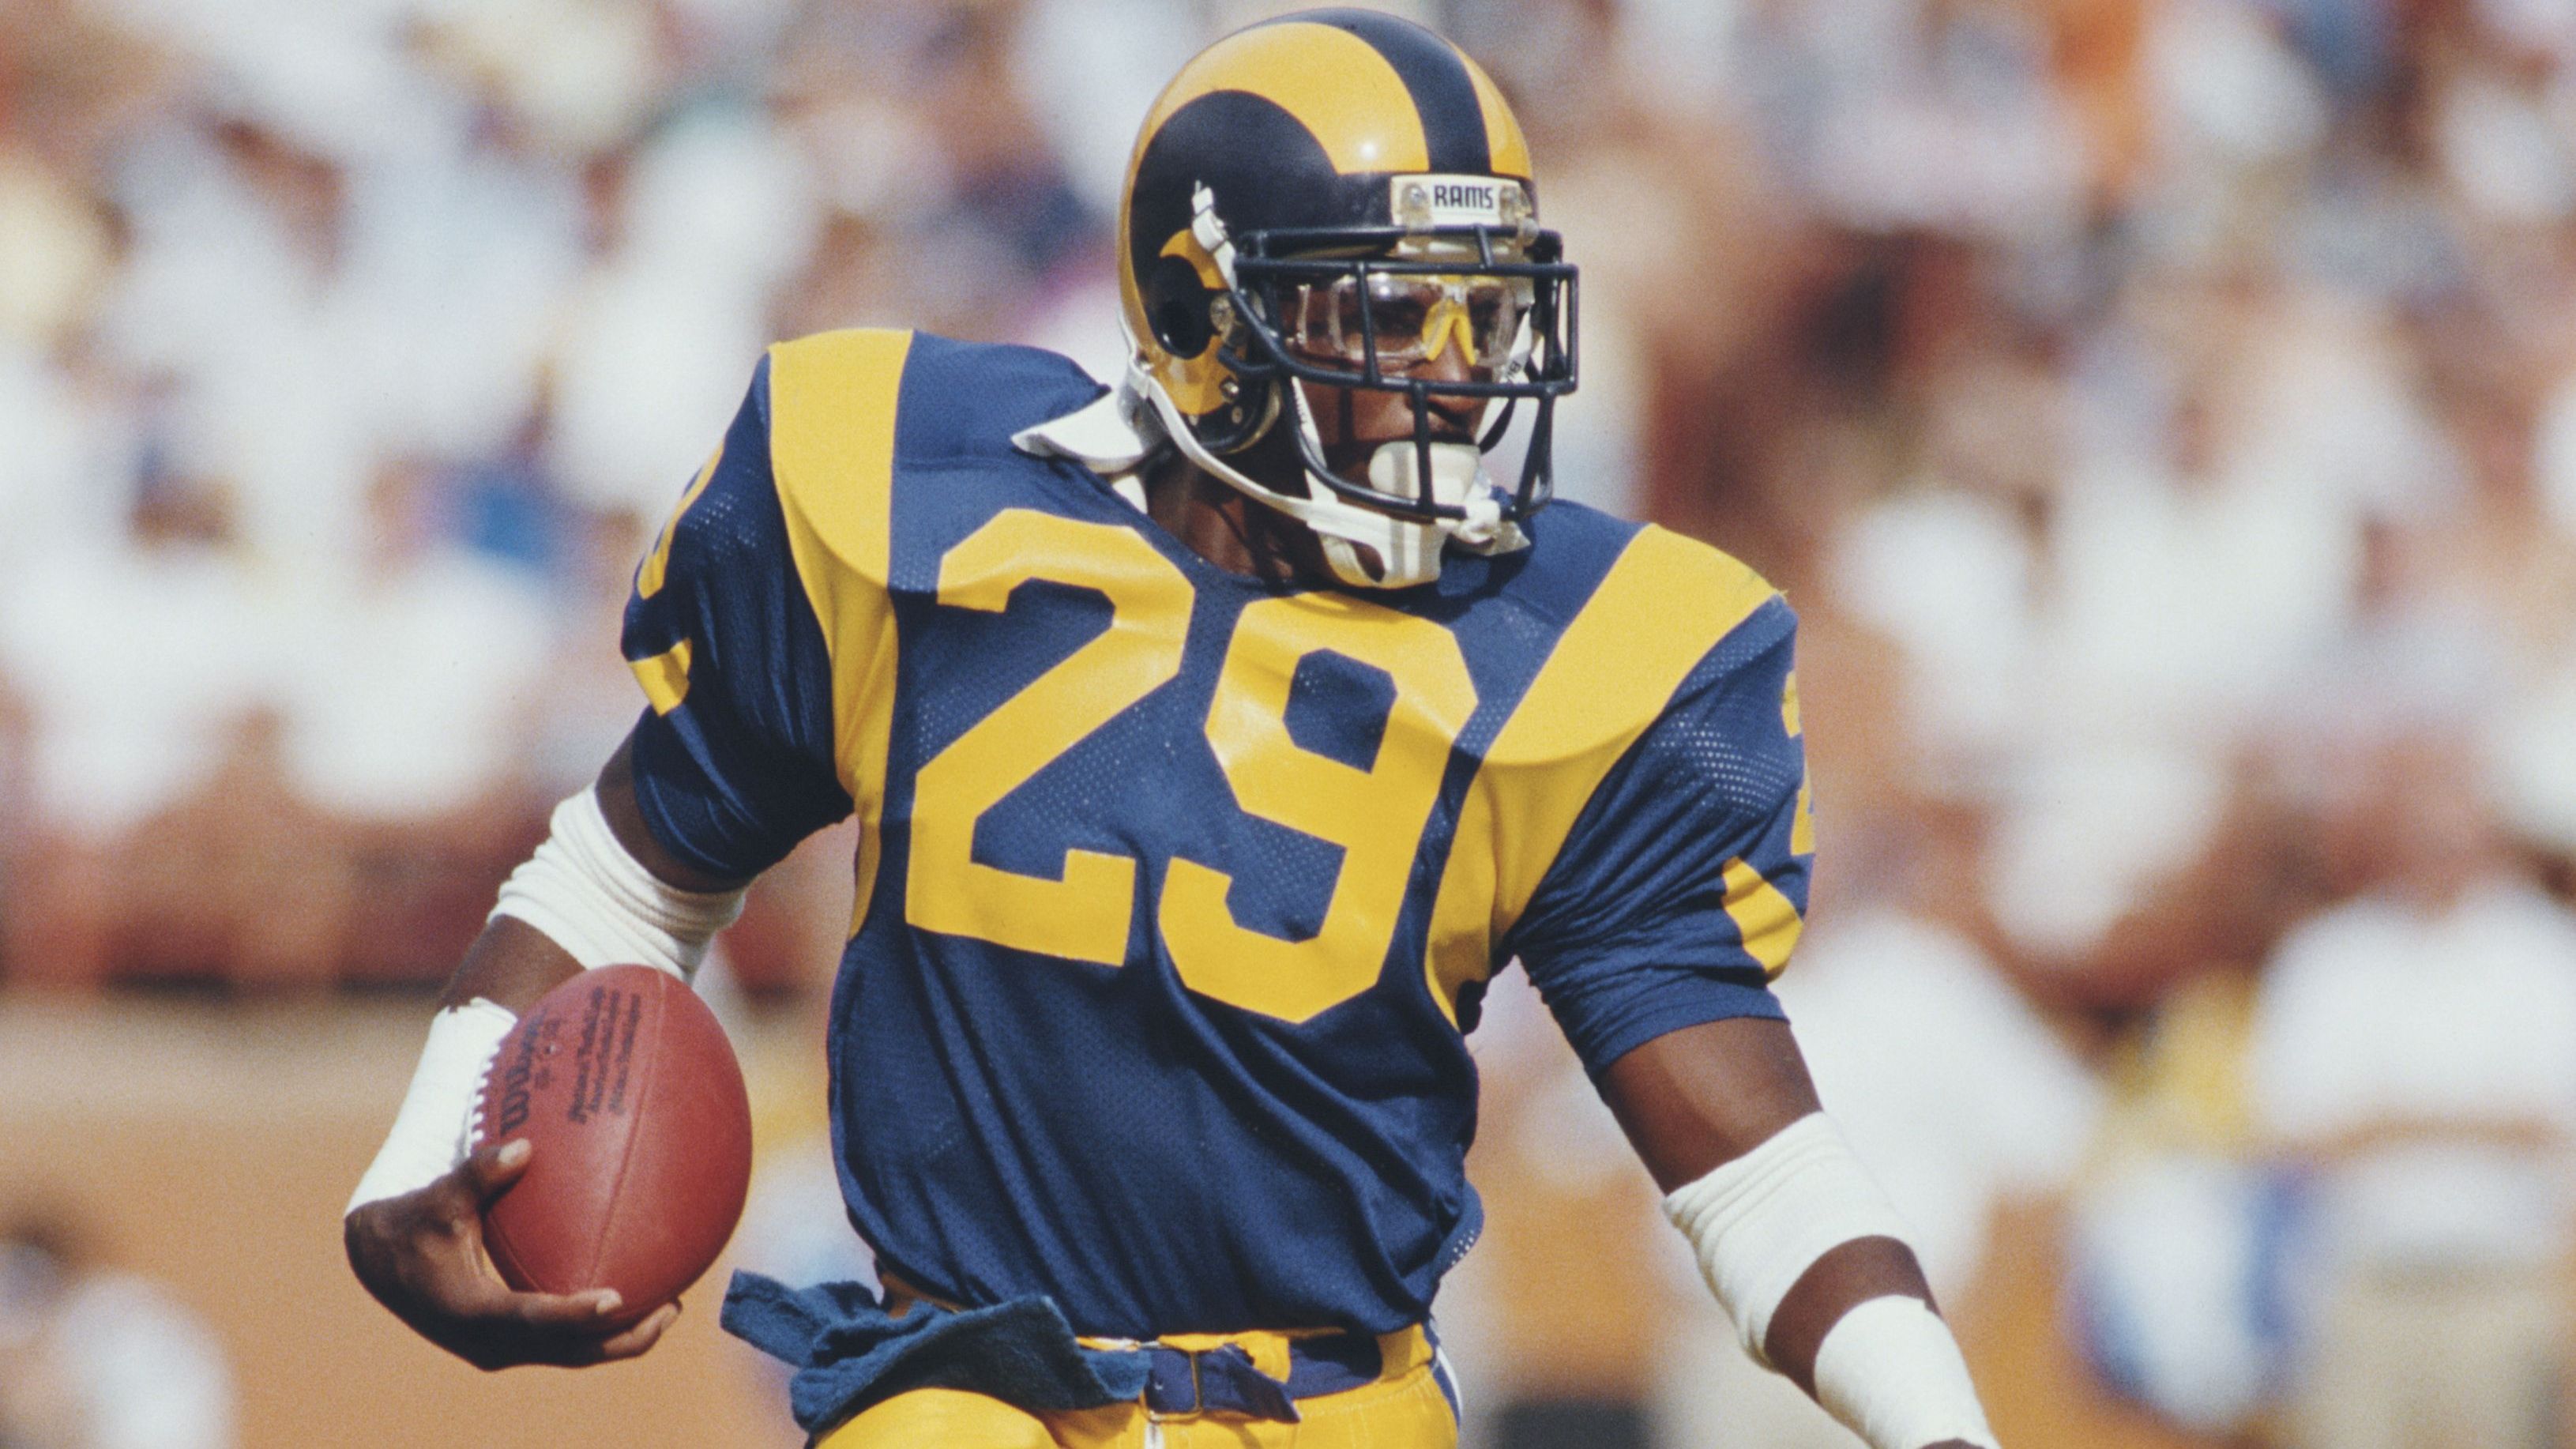 <strong>29: Eric Dickerson</strong><br>Teams: Los Angeles Rams, Indianapolis Colts, Los Angeles Raiders, Atlanta Falcons<br> <strong></strong>Position: Running Back<br>Erfolge: Pro Football Hall of Famer, 1986 NFL Offensive Player of the Year<br>Honorable Mention: Earl Thomas